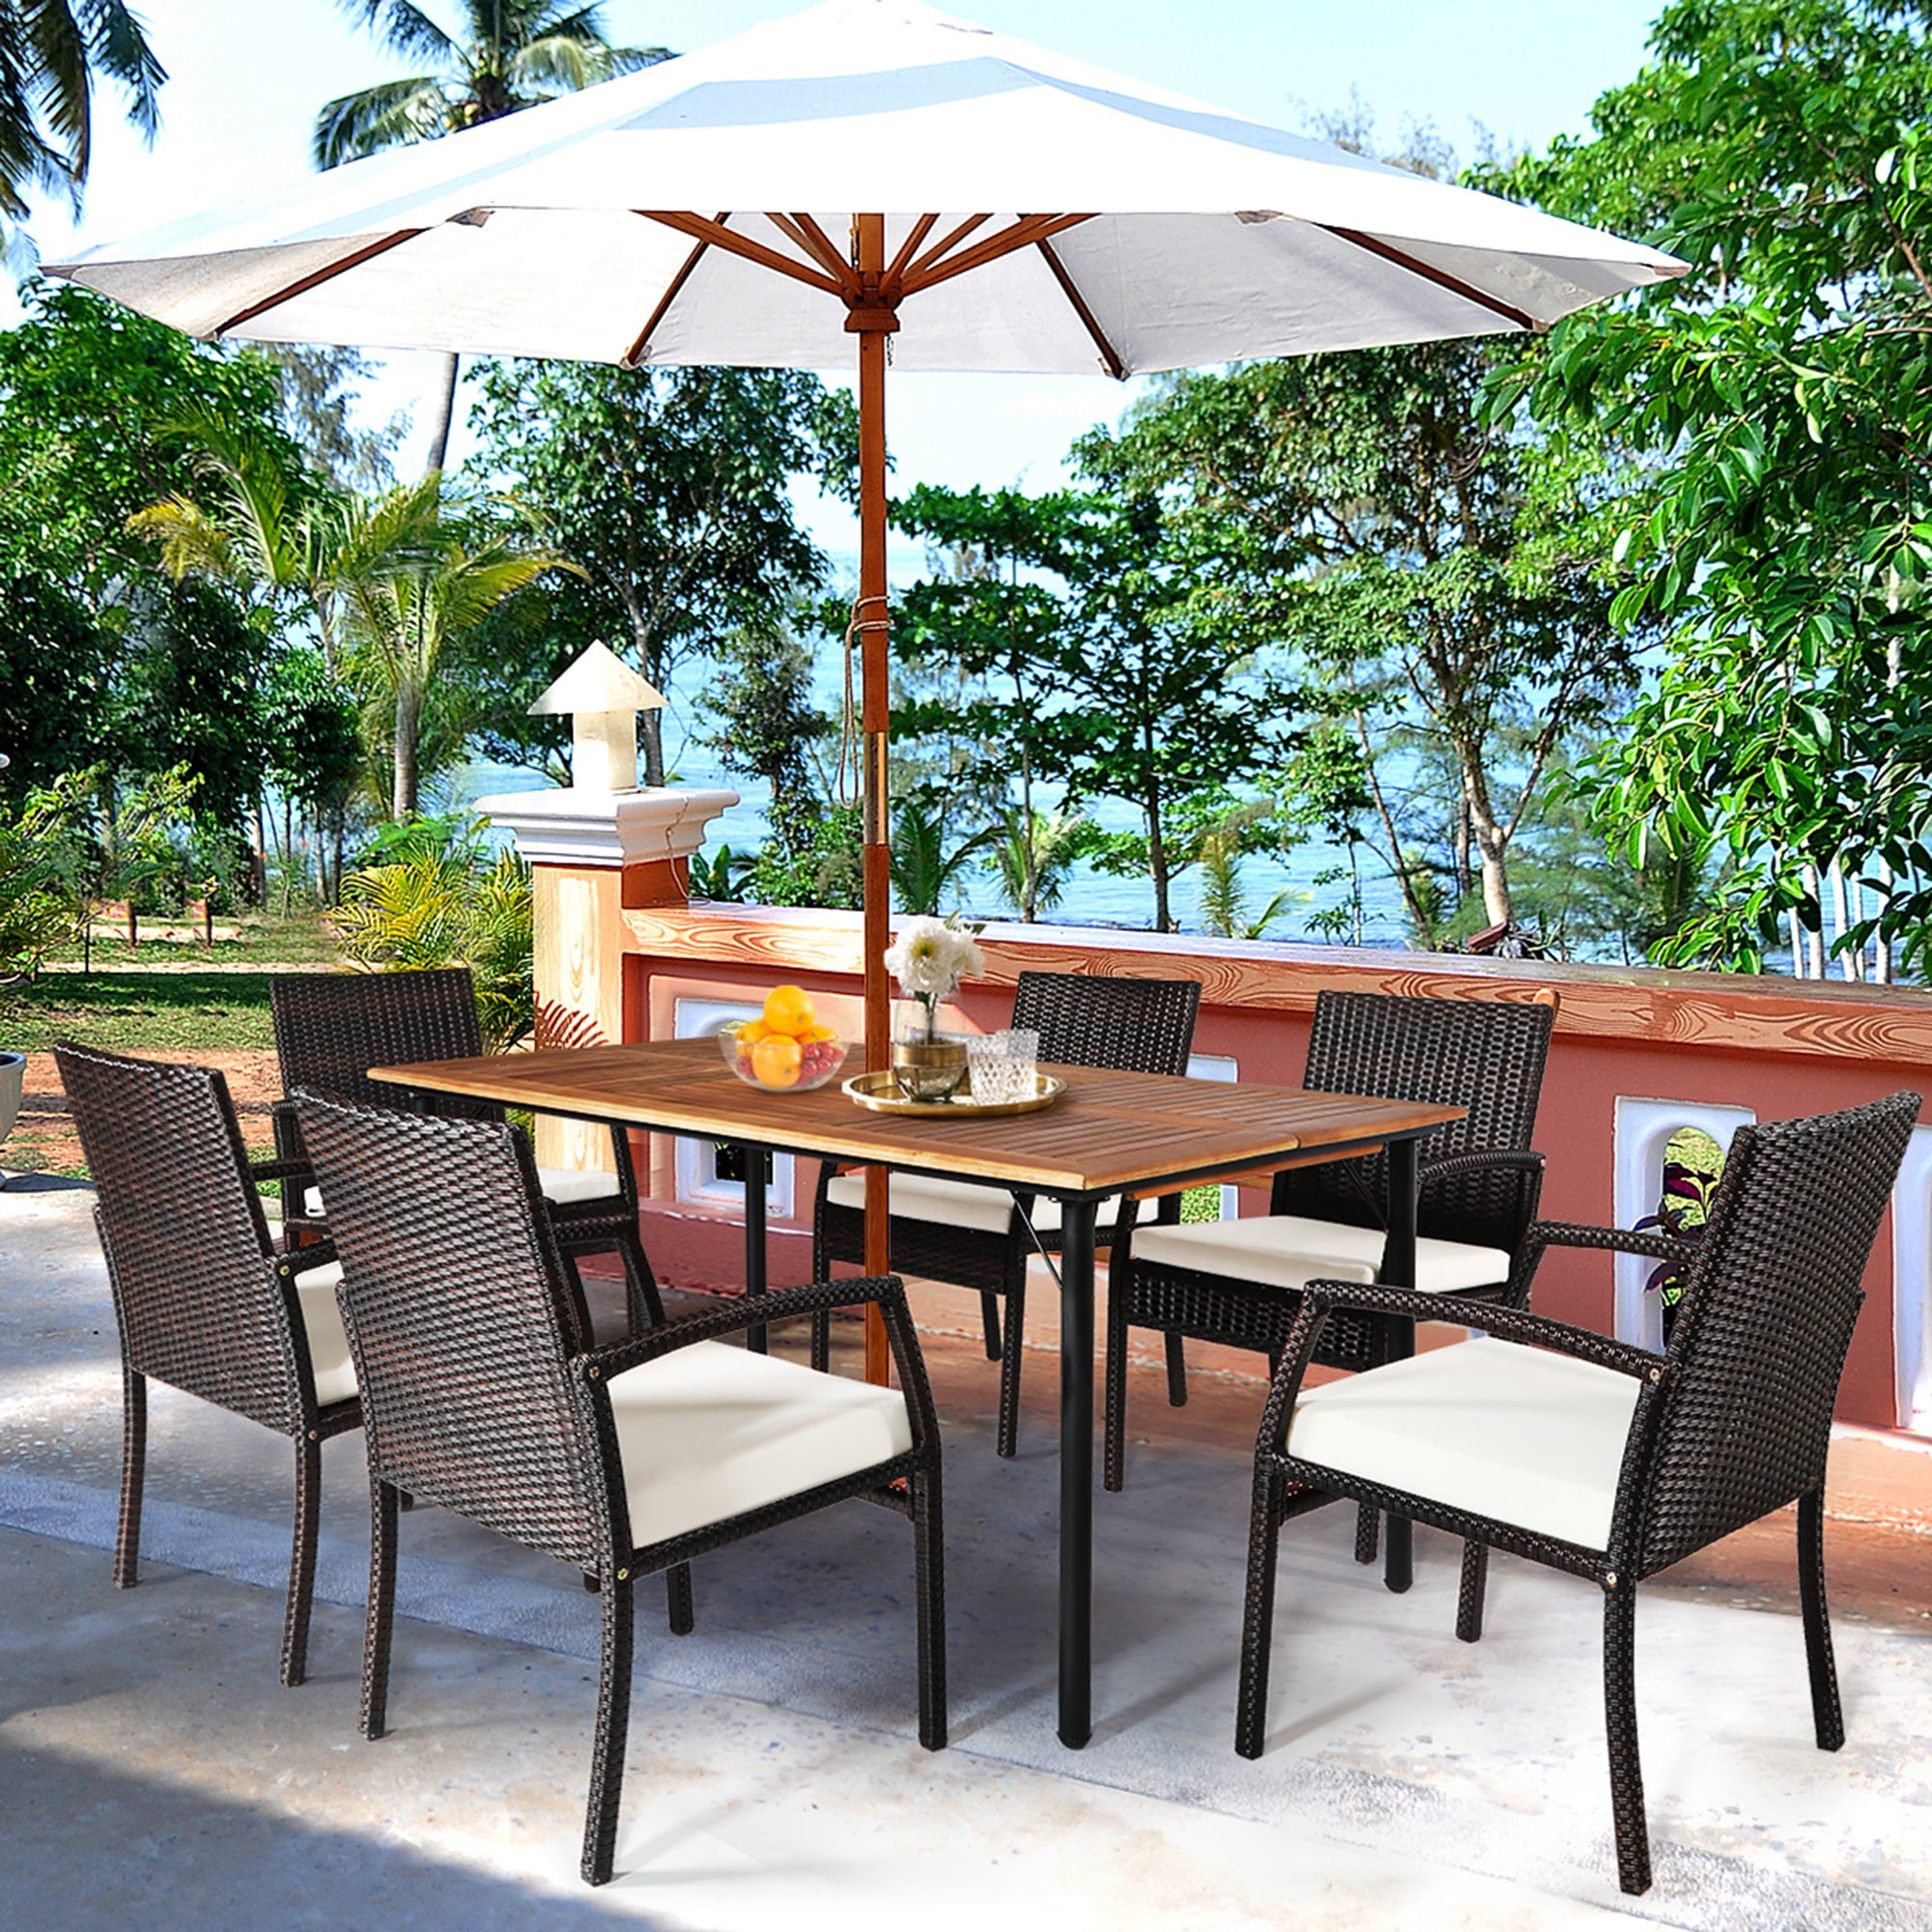 Gymax 7 Pieces Patio Dining Furniture Set With Wooden Tabletop Cushion Umbrella Hole Com - Outdoor Patio Table With Umbrella Set